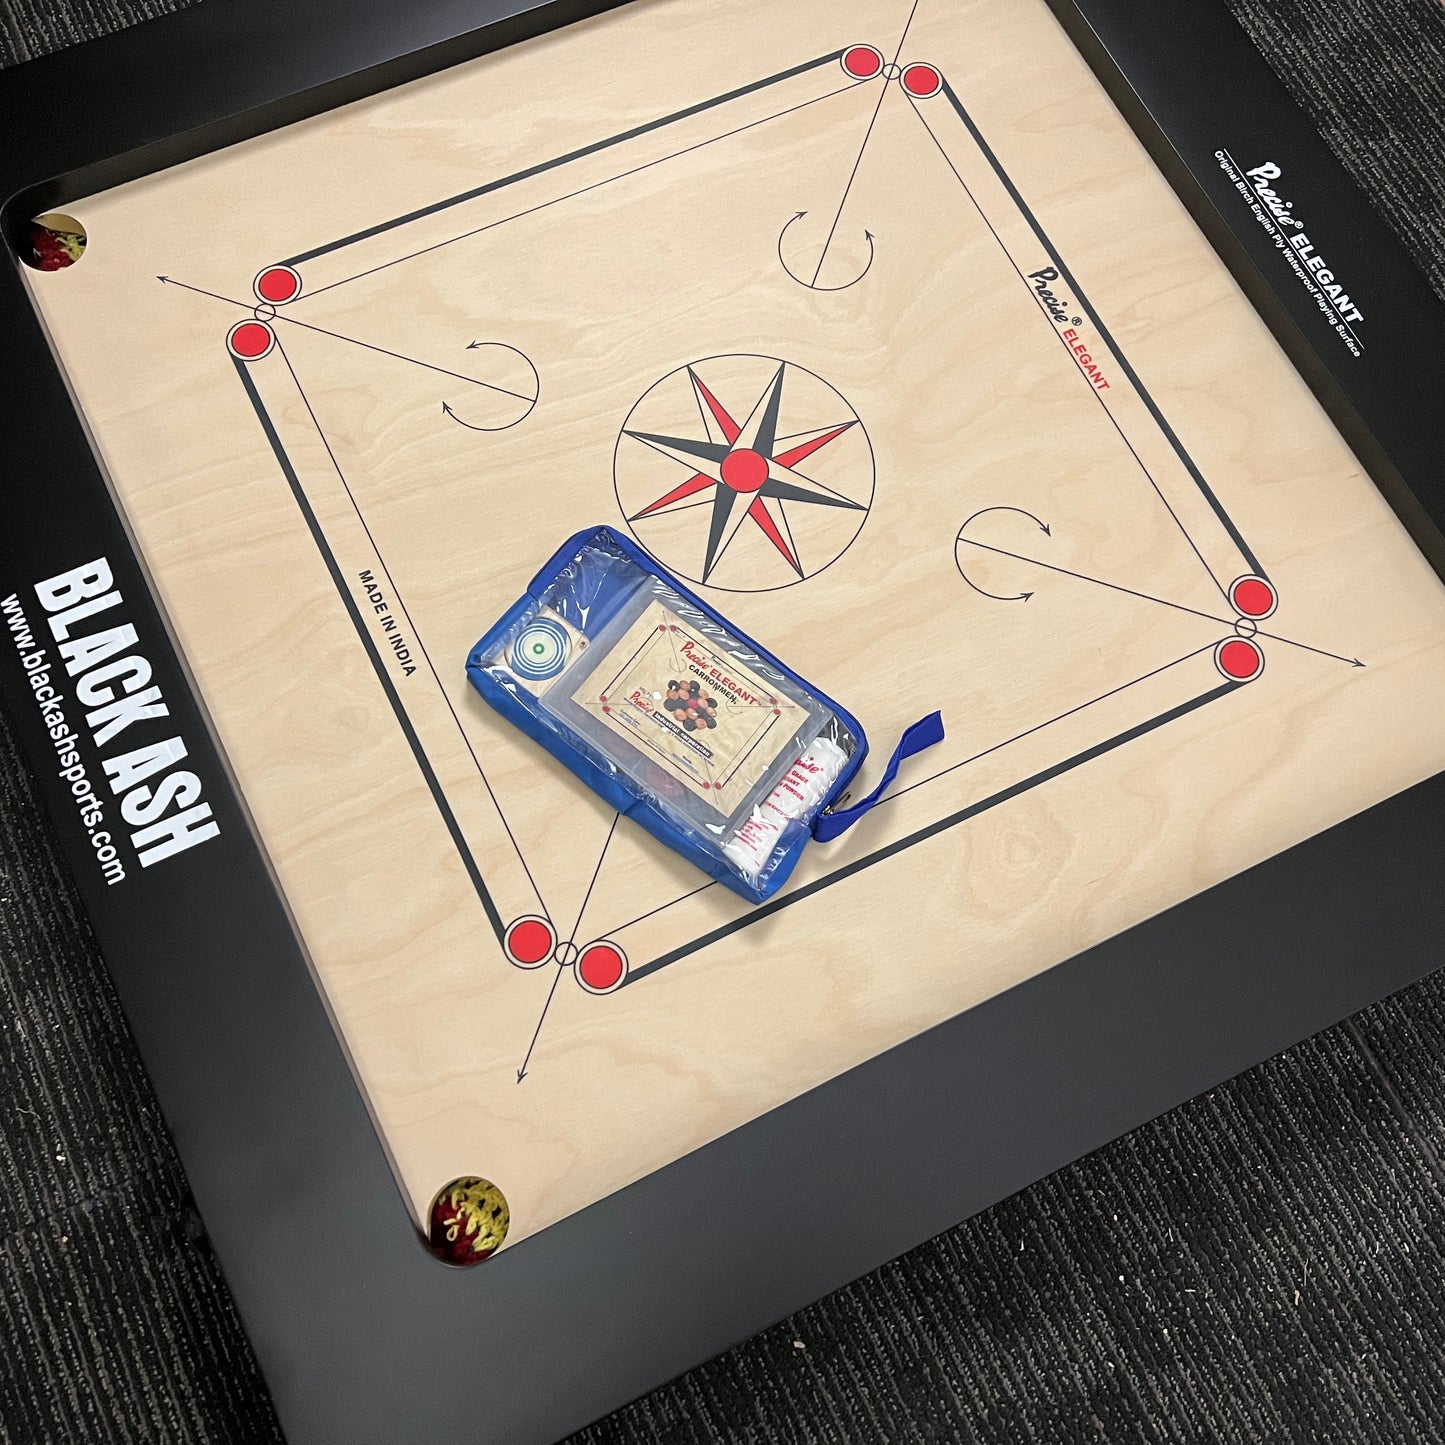 Precise Bulldog Elegant carrom board, 28mm thick English Birchwood ply, 37x37 inches overall size with a 29x29 inch playing area and 4-inch borders. Comes with a striker and a set of coins, known for its super satin smooth tournament playing surface.